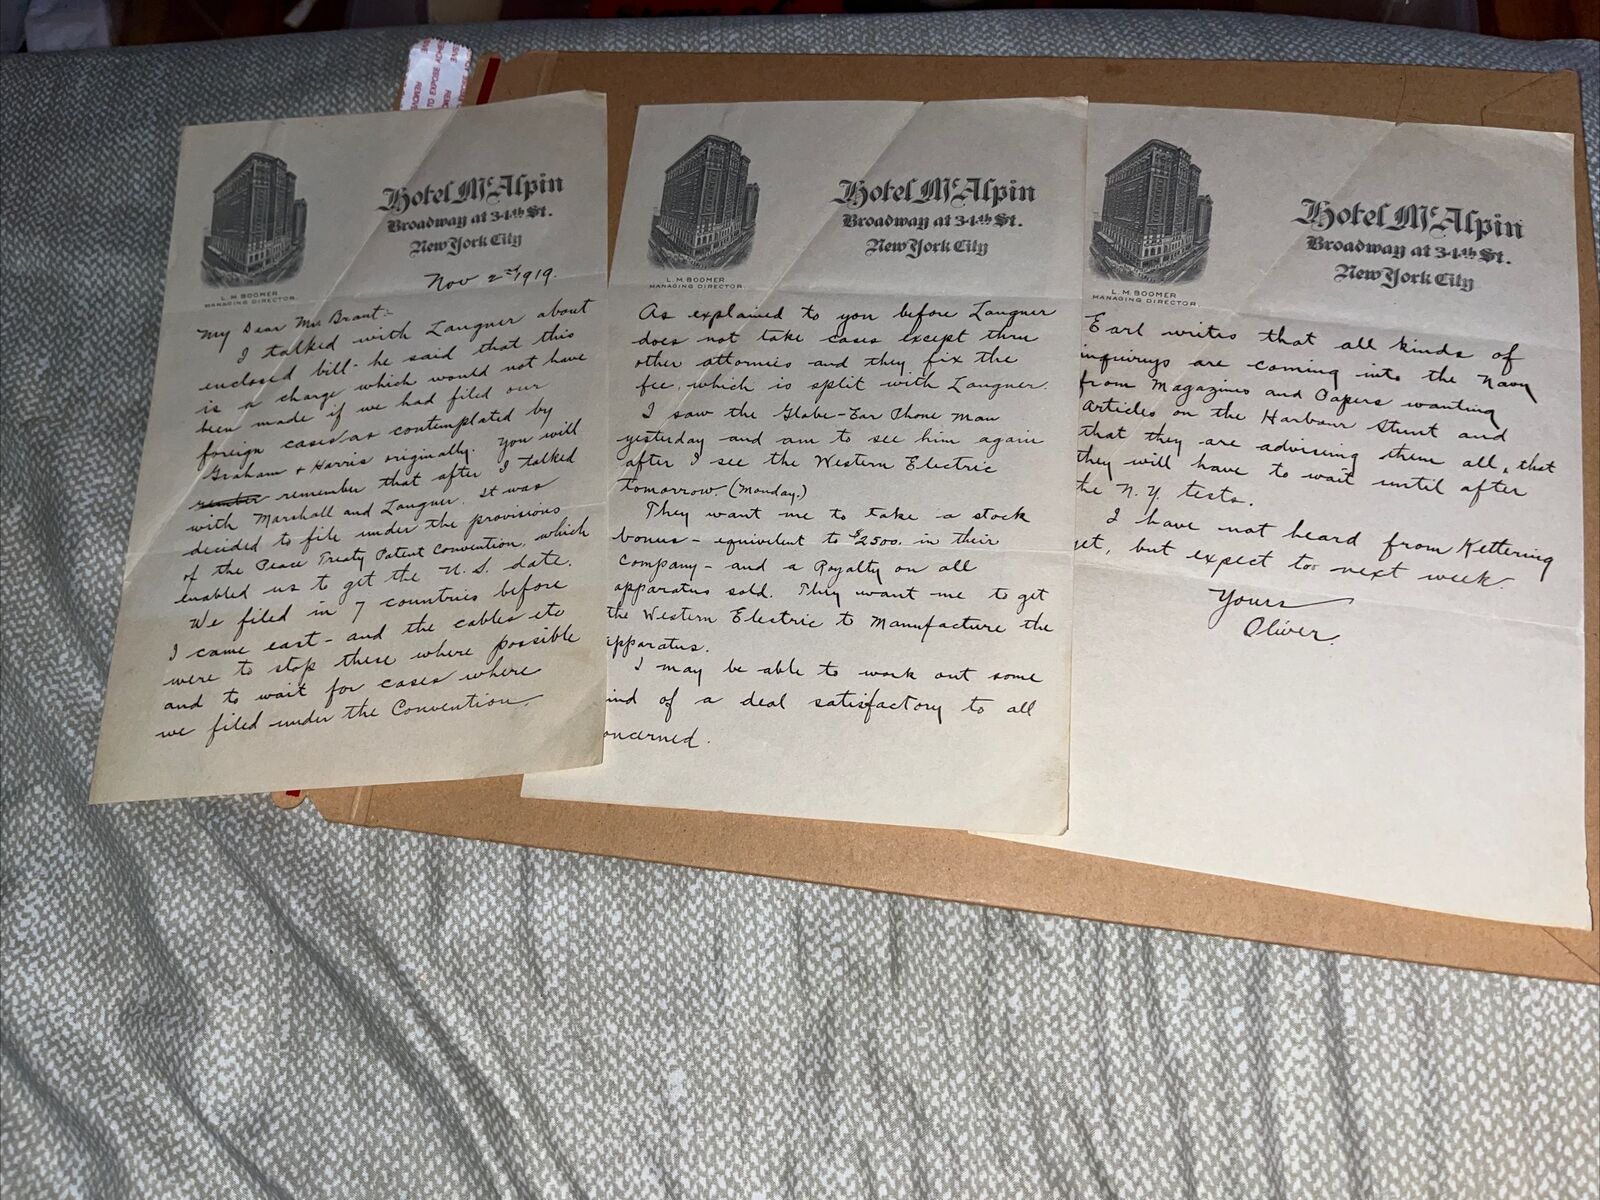 1919 Letter on Selling Invention to Western Electric Hotel McAlpin New York City